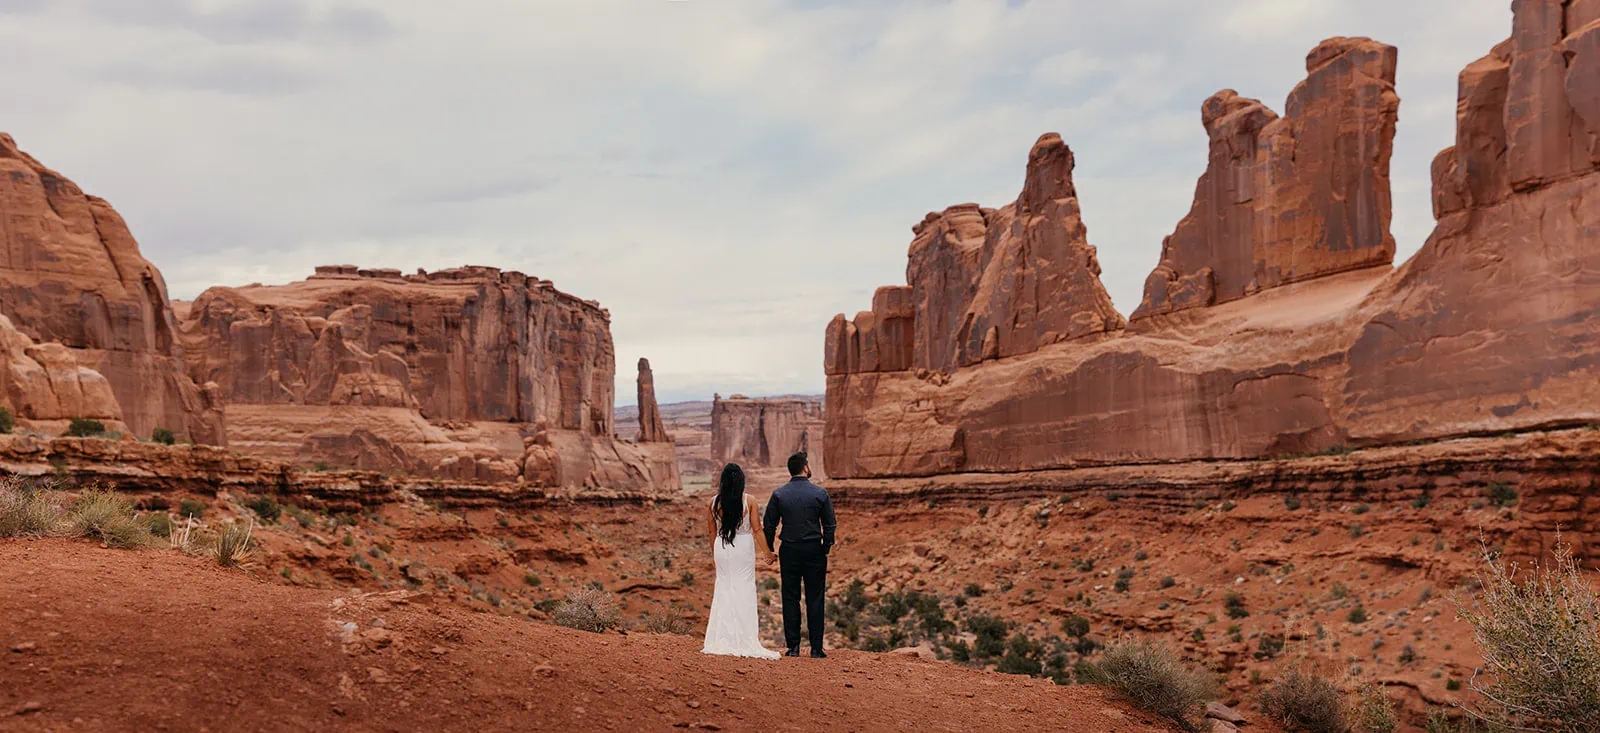 A couple stands for a portrait in Arches National Park.